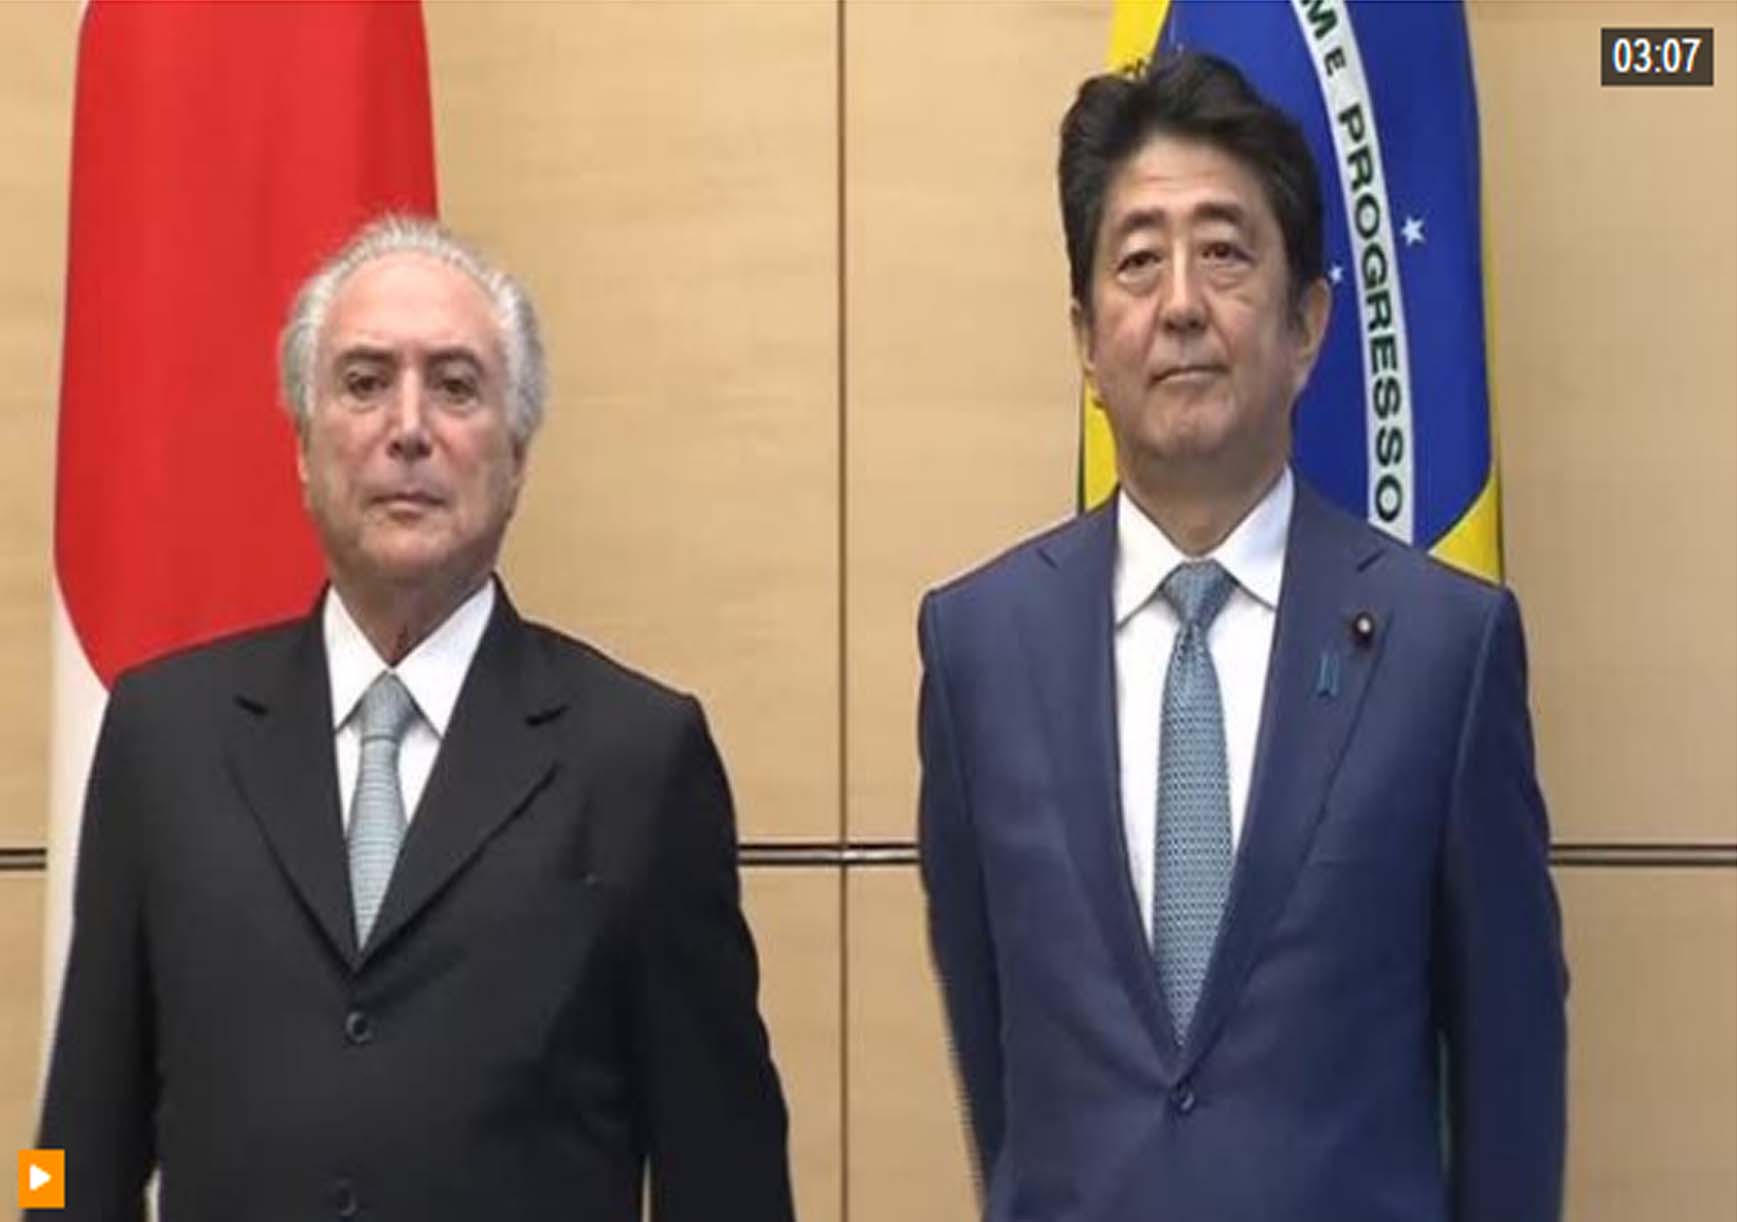 Brazilian President meets Japan PM Abe, seeks to lure investments.